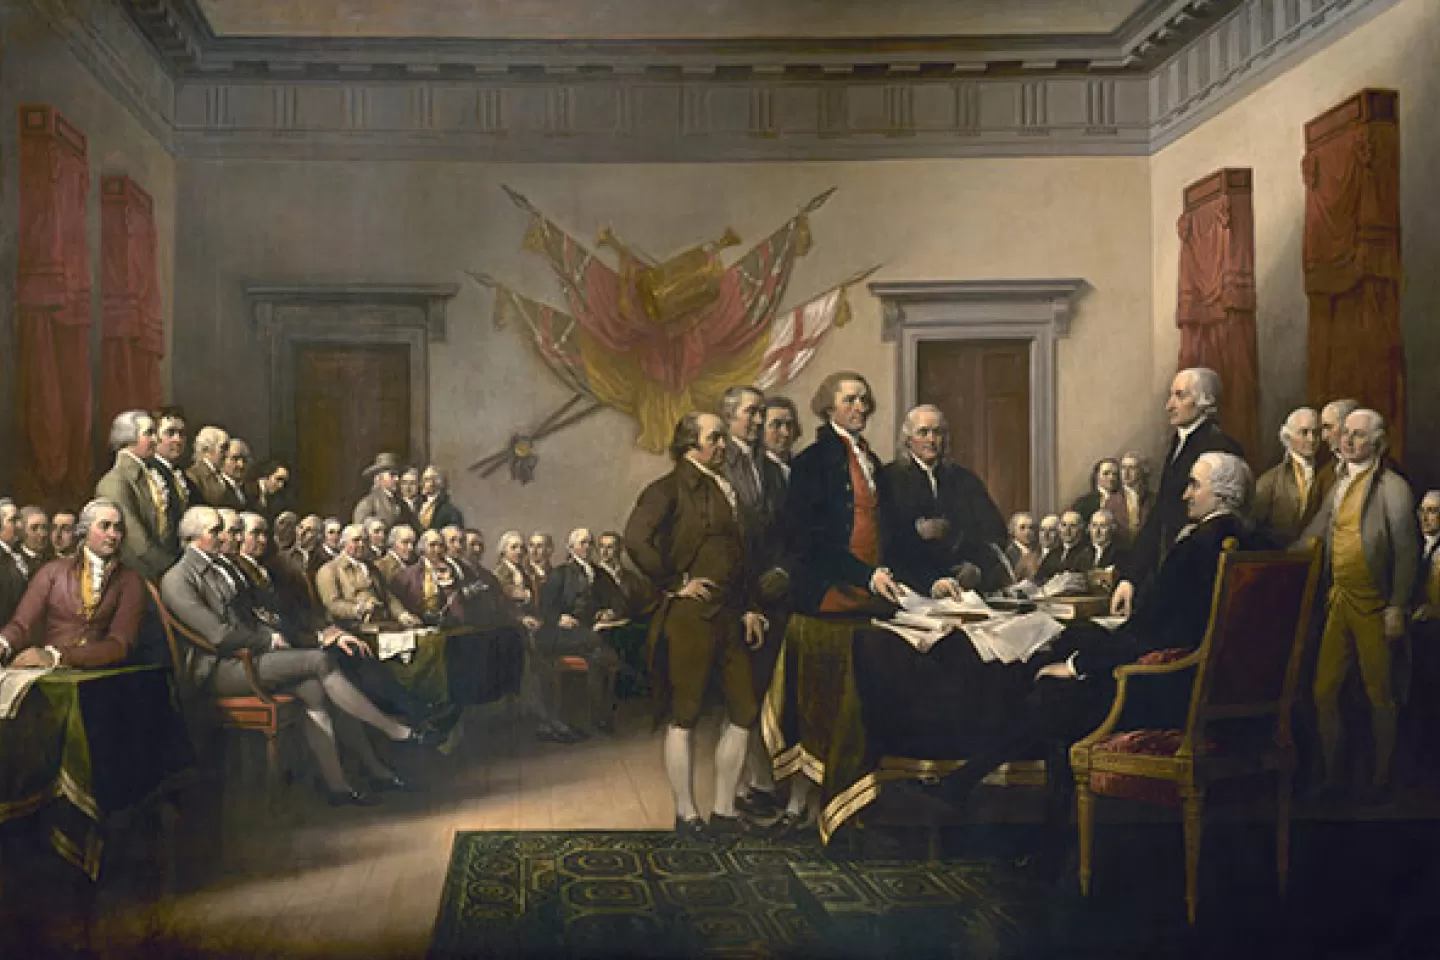 The Presentation of the Declaration of Independence, July 4, 1776